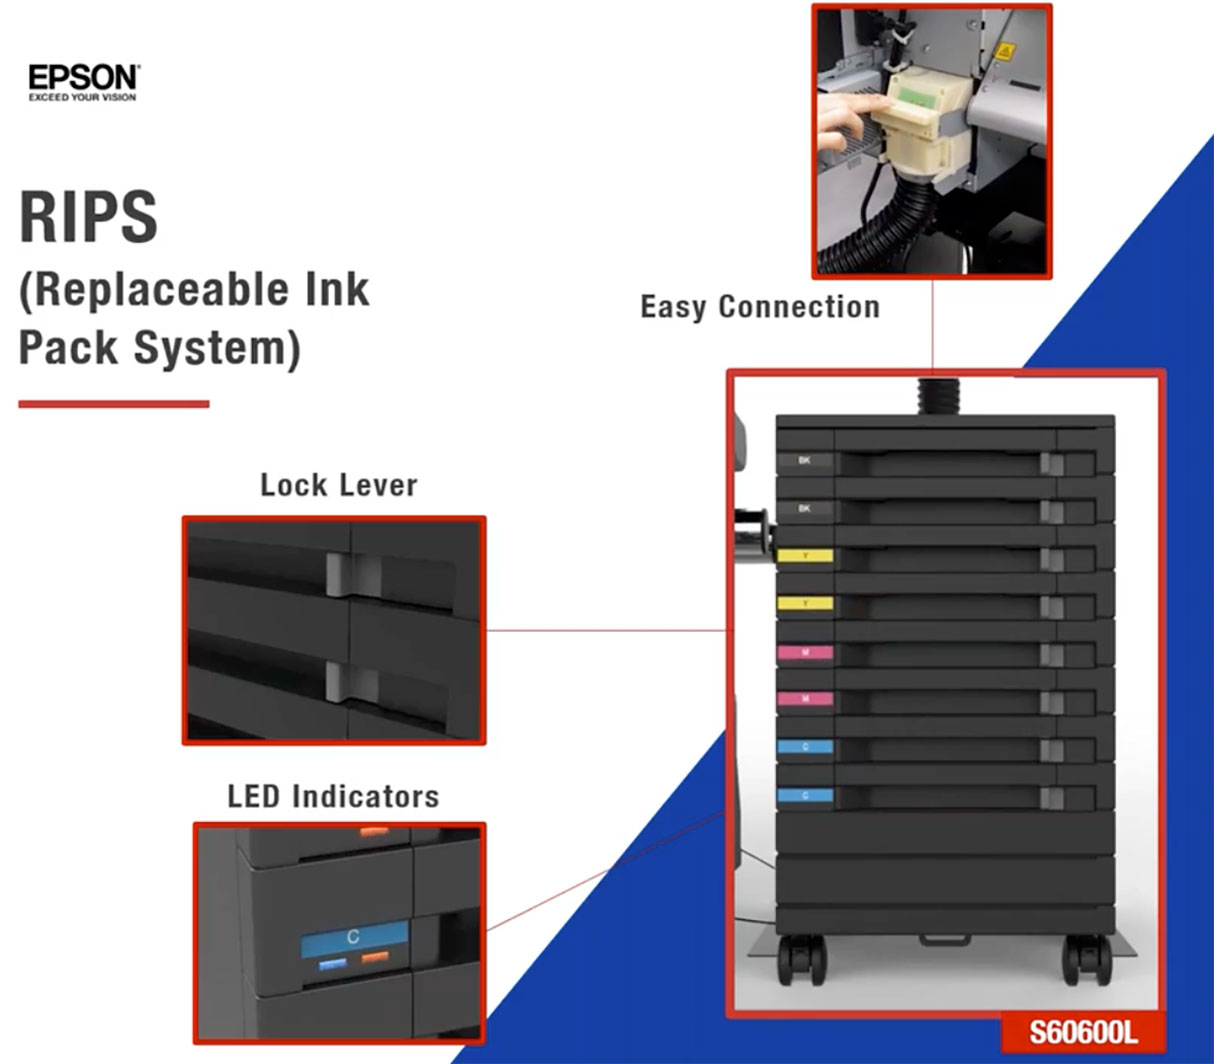 epson surecolor s60600l bulk ink eco solvent printer showing bulk ink system with RIPS replaceable ink pack system